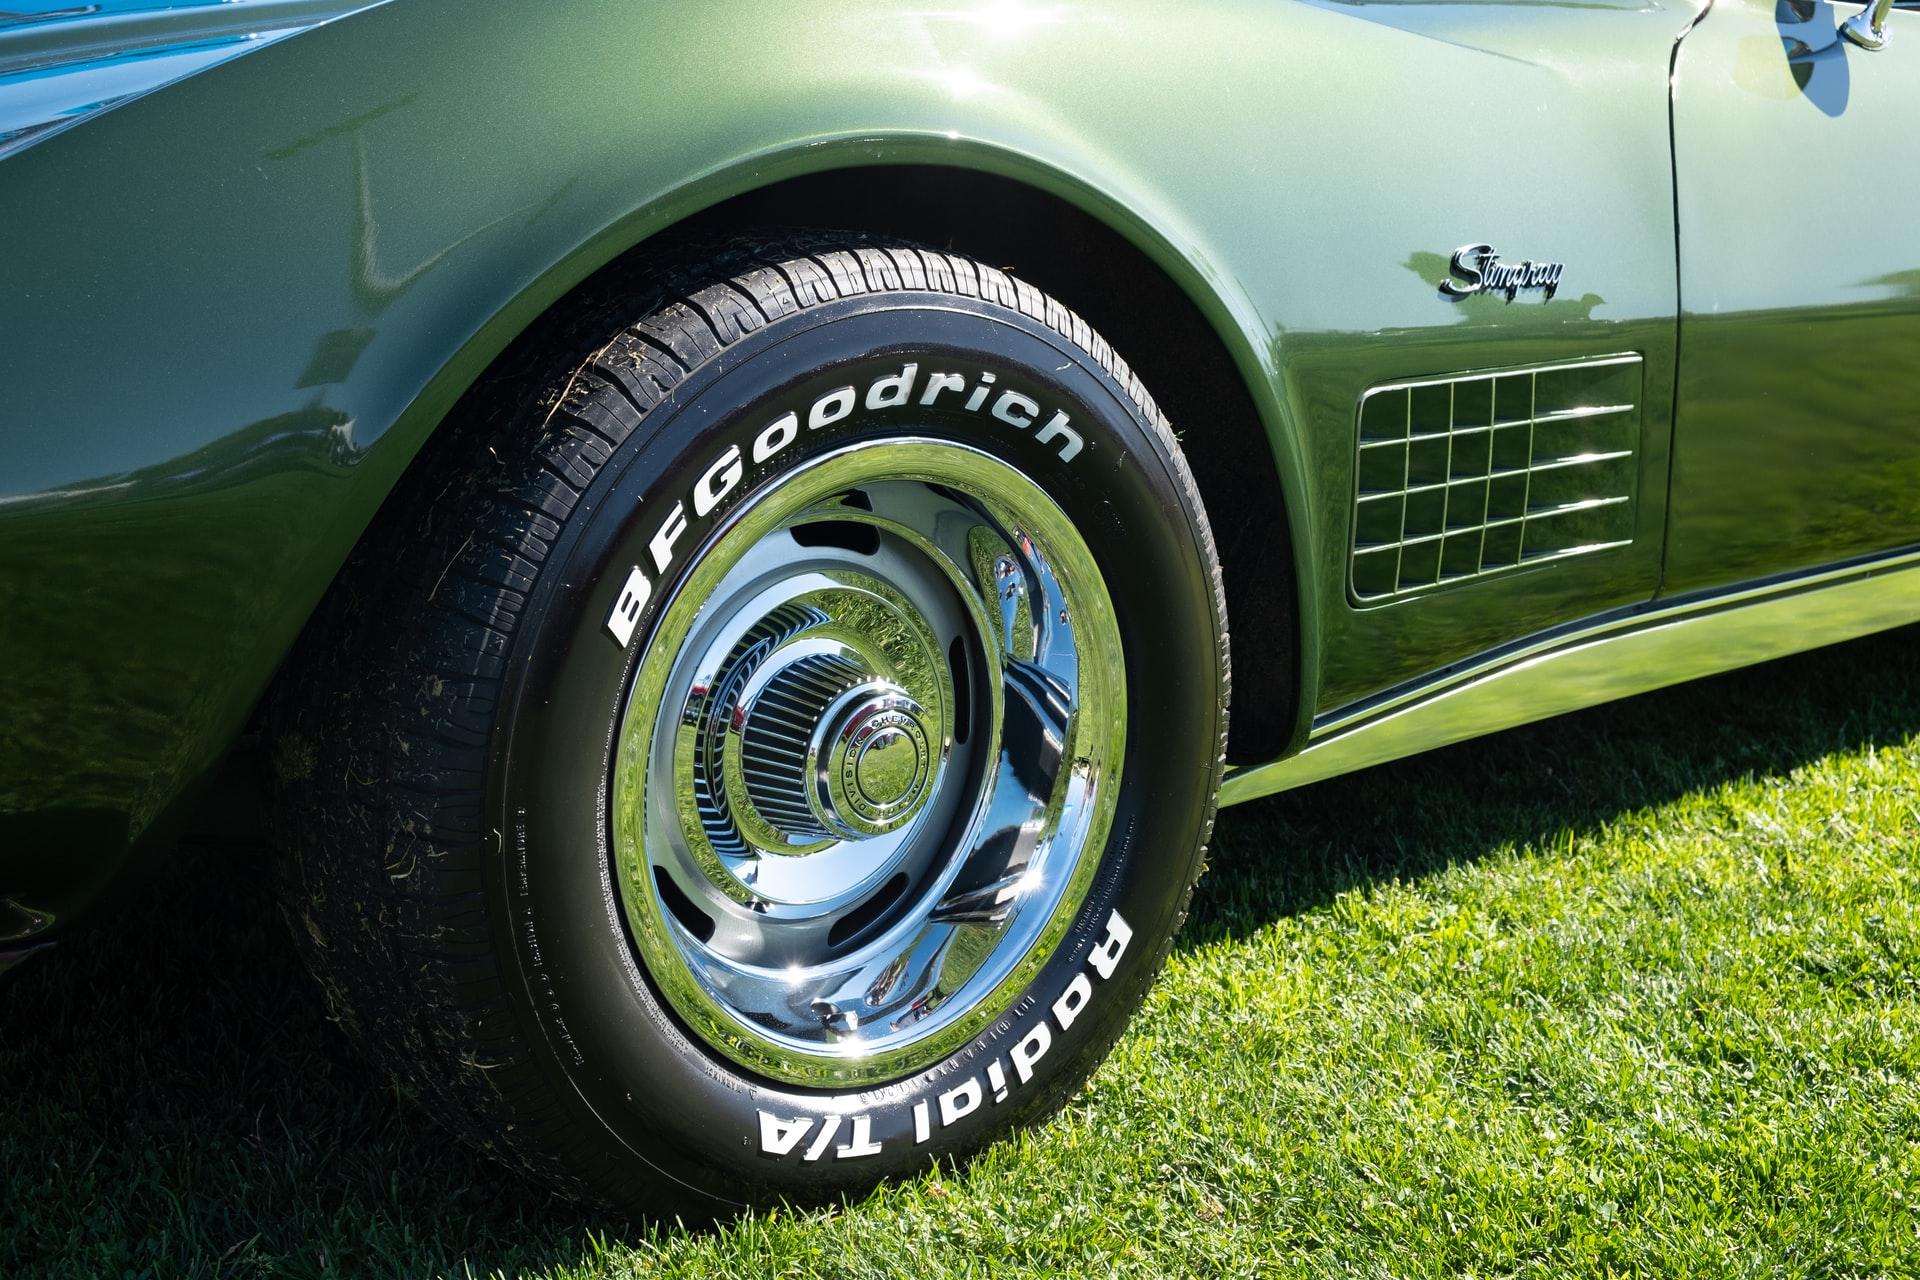 If you love a sleek, green car, there are a lot of green Corvette options for you.